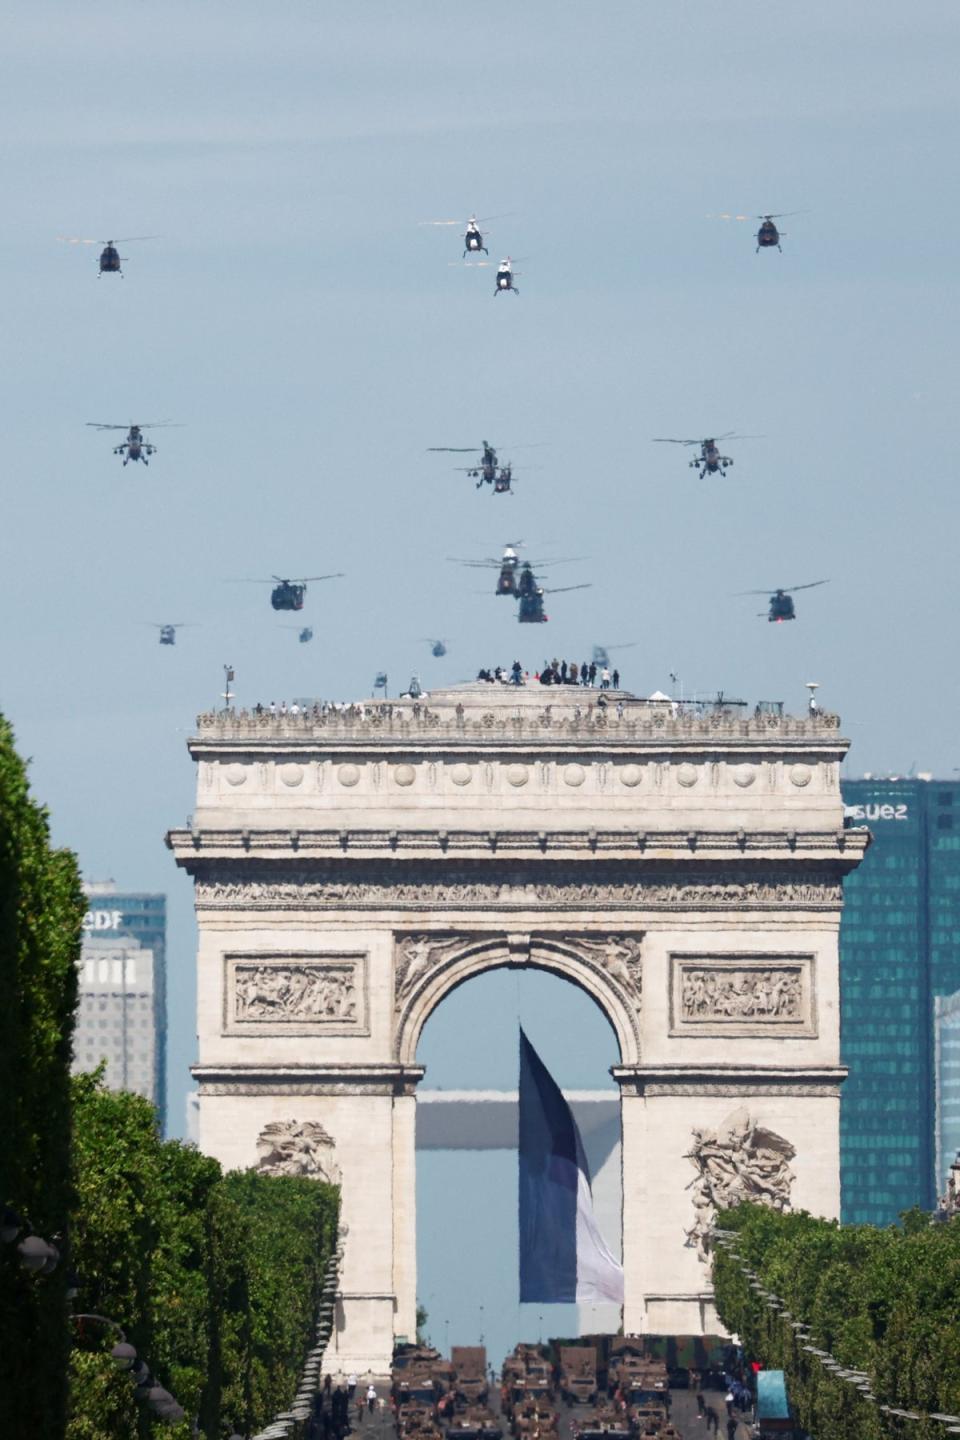 Helicopters fly over the Champs-Elysees Avenue during the annual Bastille Day military parade in Paris. (Reuters)